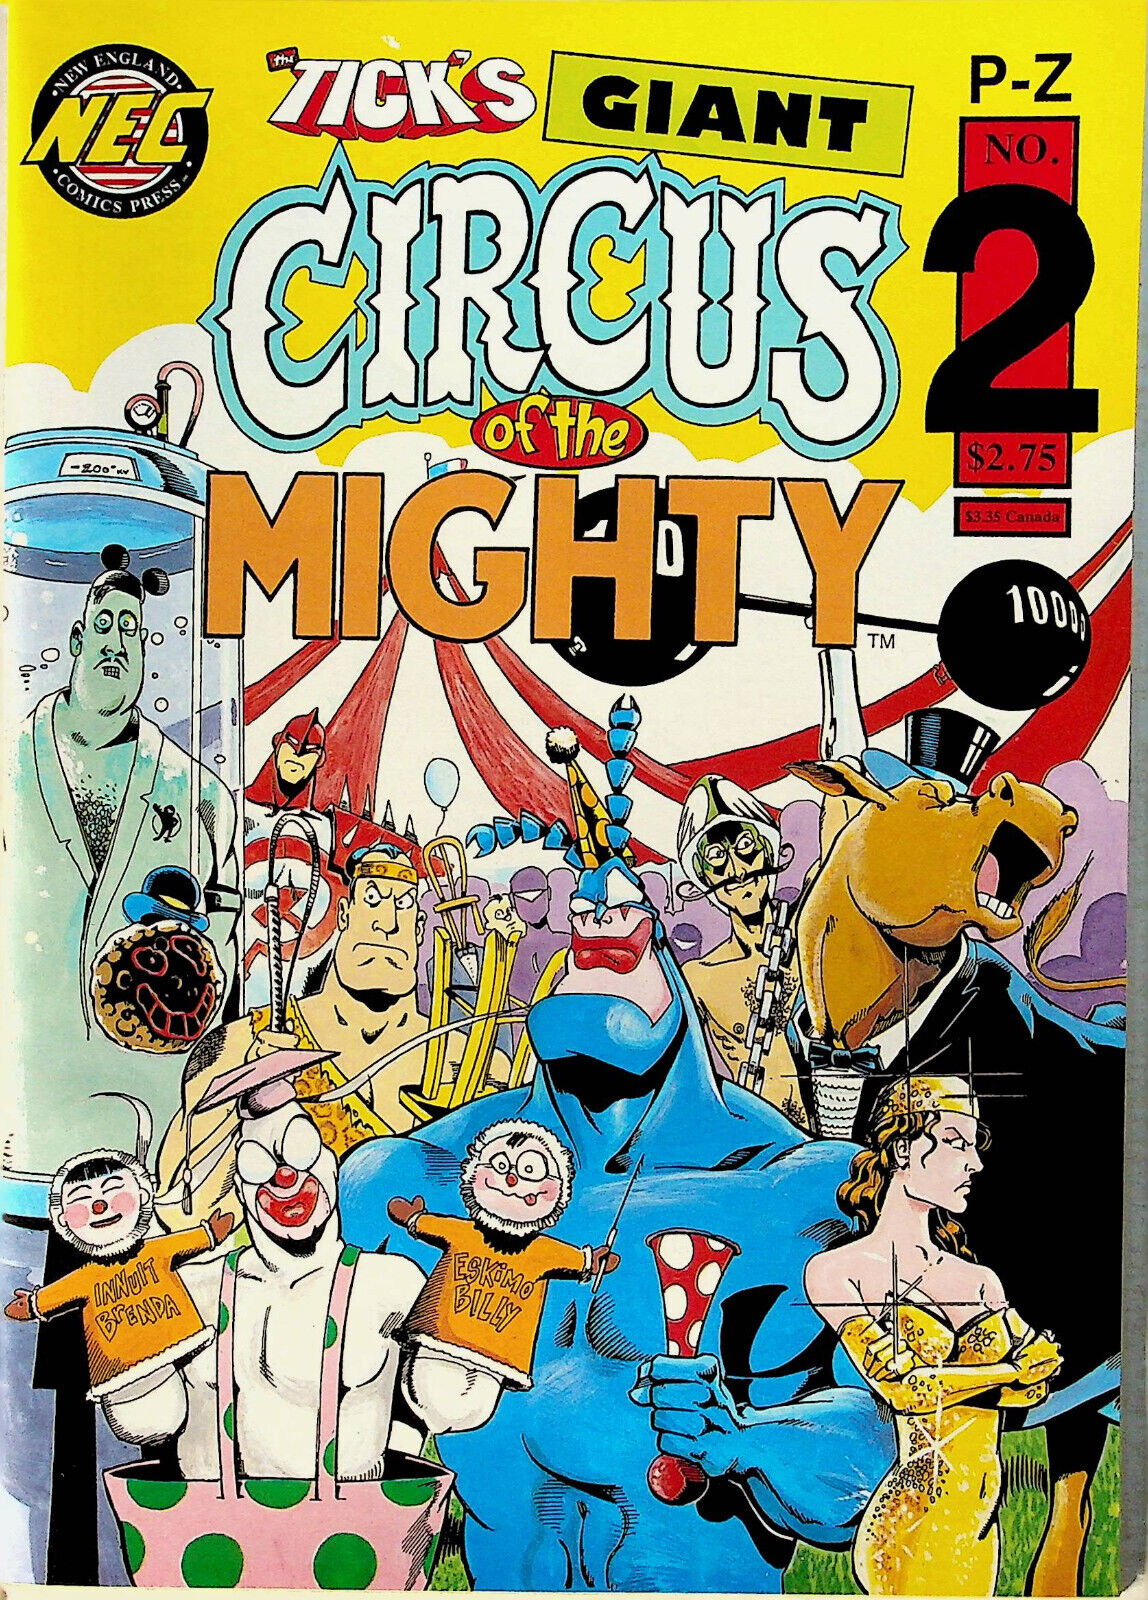 The Tick\'s Giant Circus of the Mighty #2 - VF/NM - I combine shipping